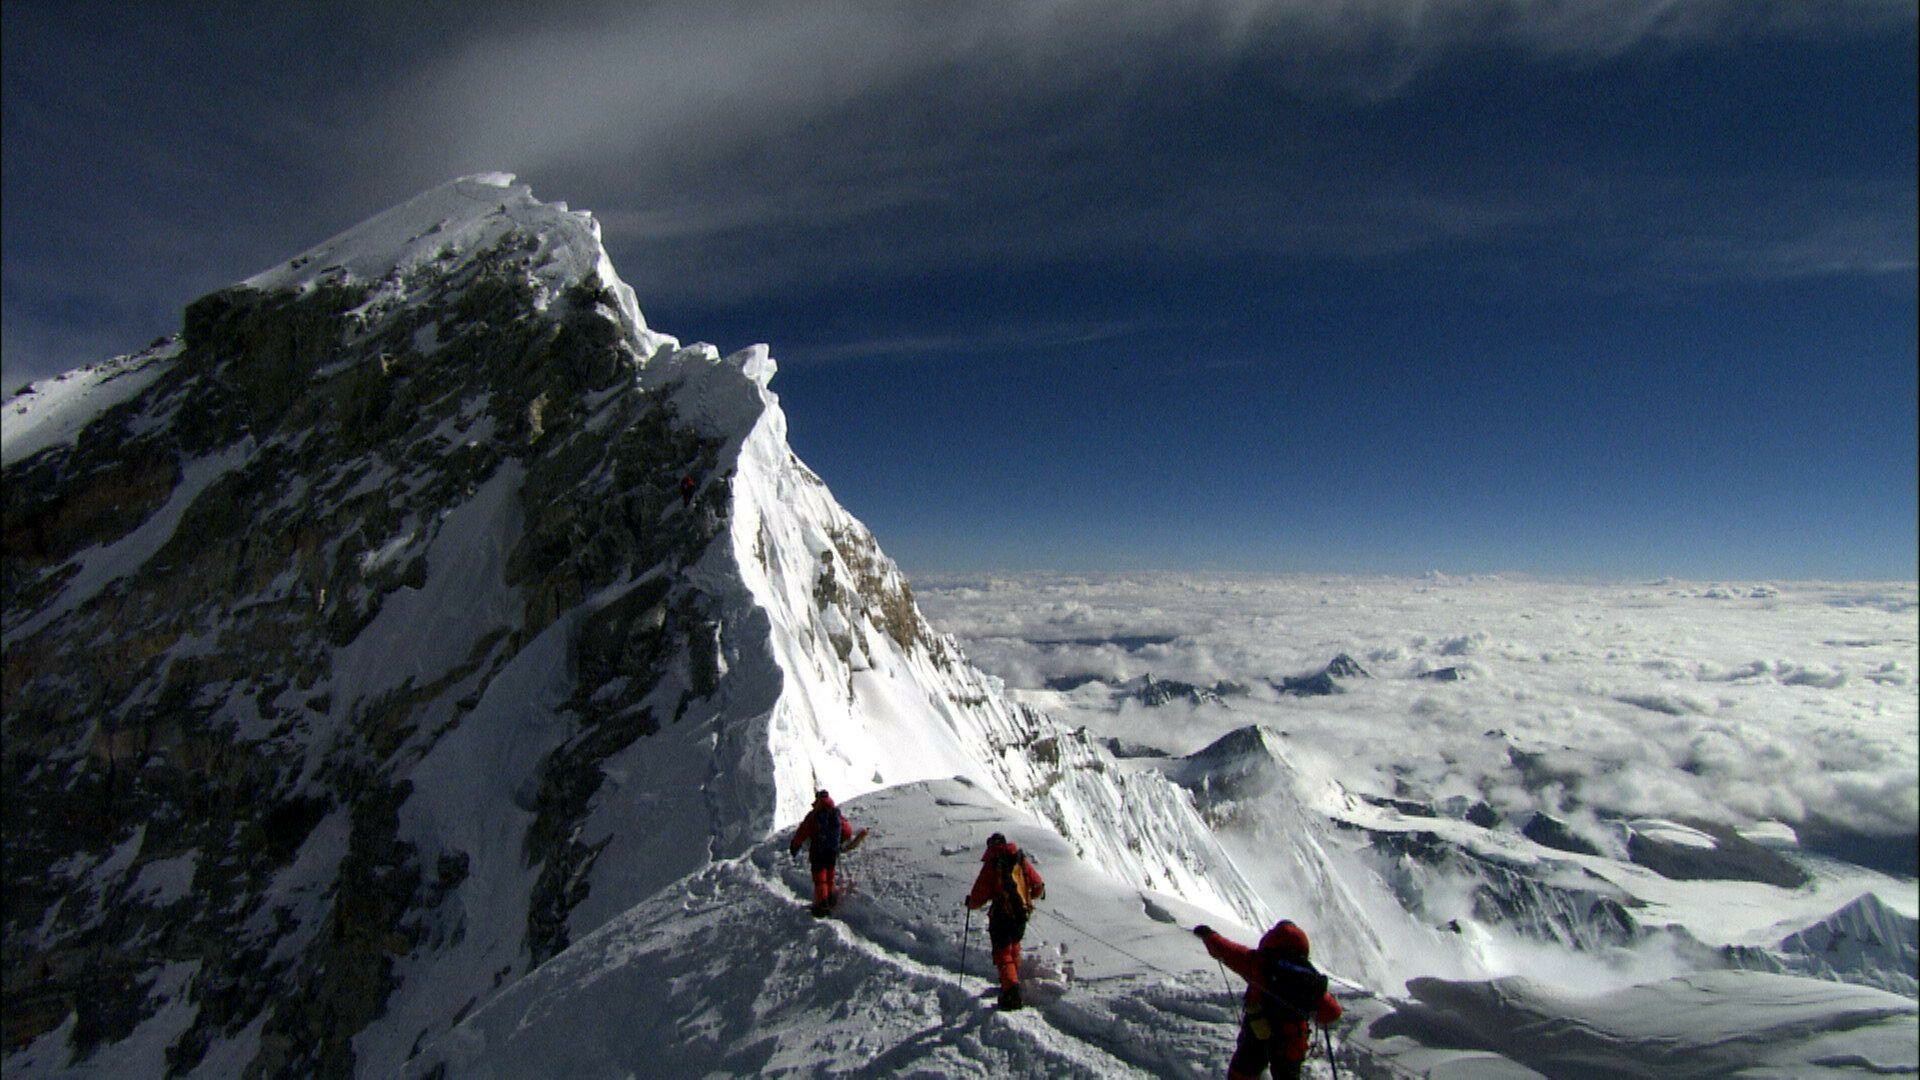 Mount Everest: The Himalaya Mountains, Climbing route, Mountaineers. 1920x1080 Full HD Wallpaper.